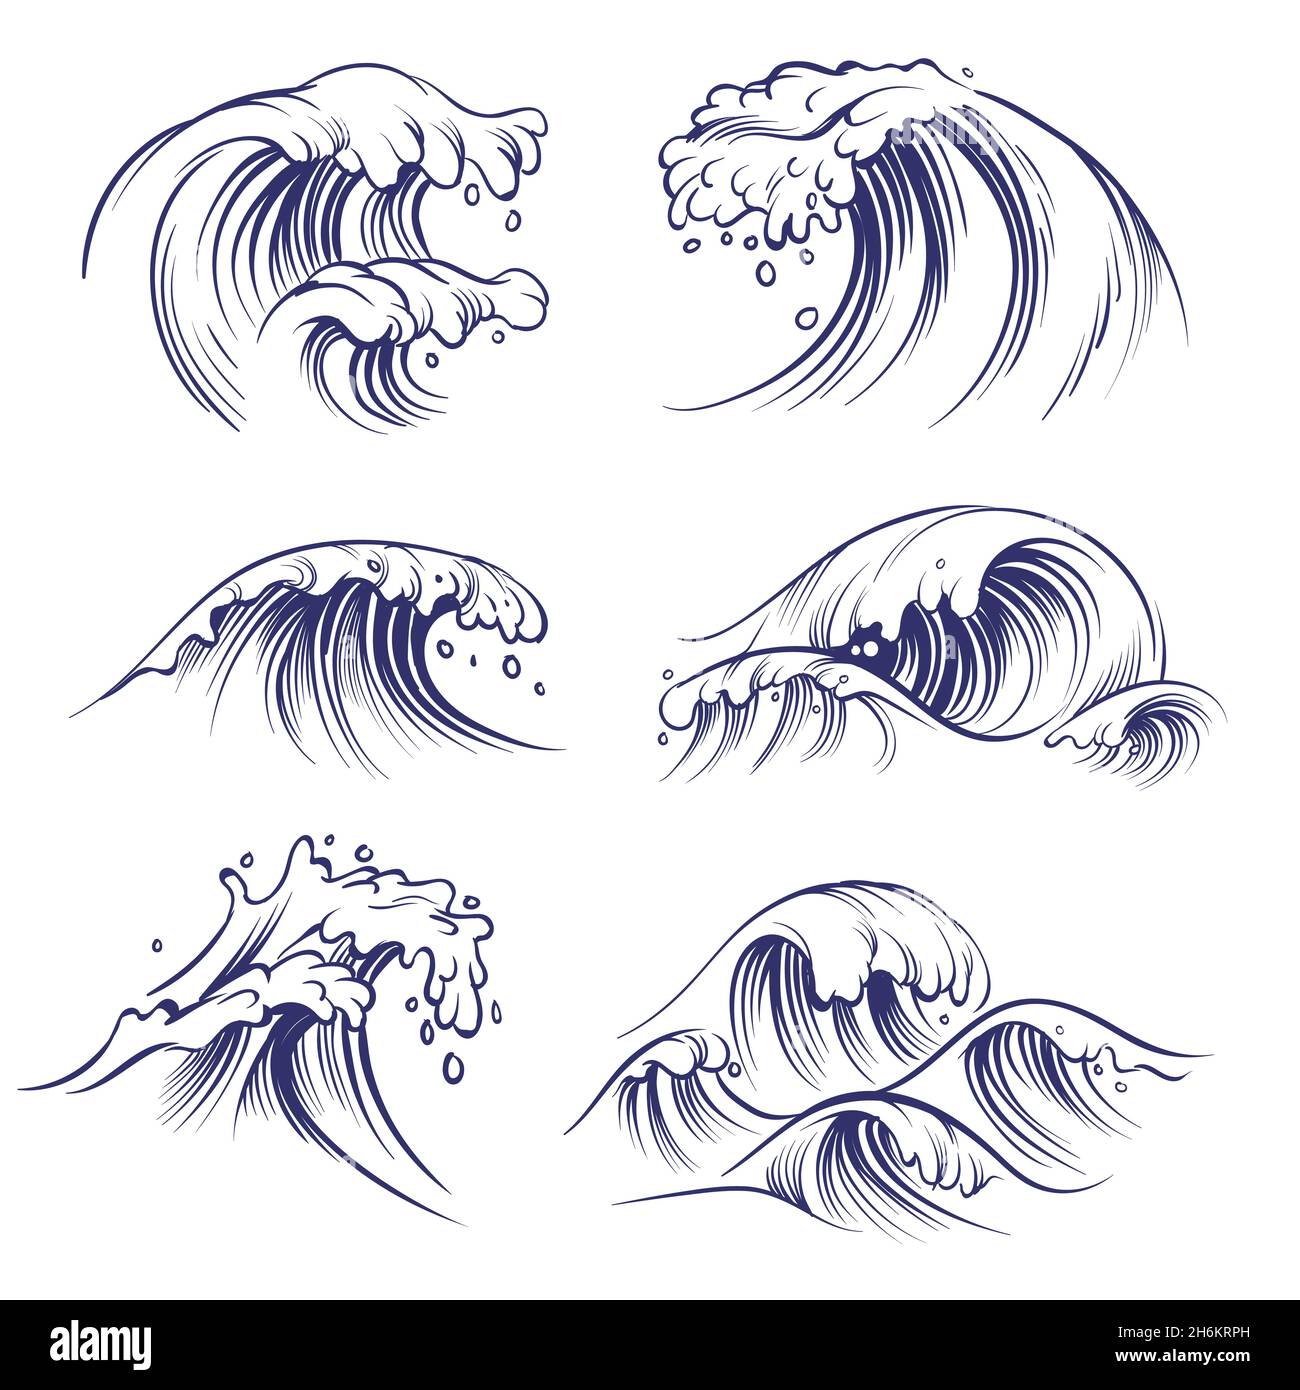 38 Cool Ocean Drawing Ideas · Craftwhack